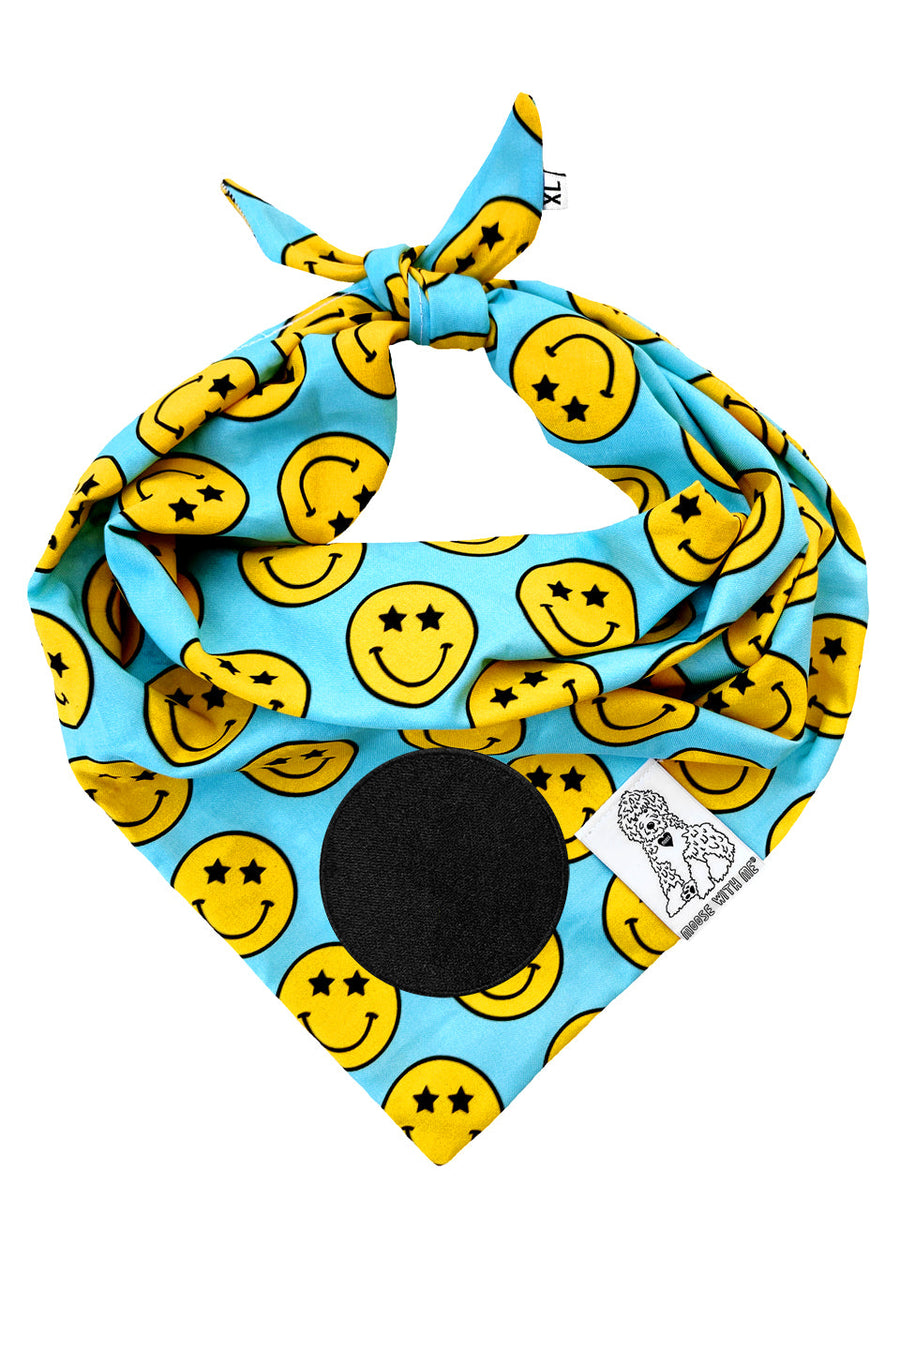 Dog Bandana Star Smiley Face - Customize with Interchangeable Velcro Patches